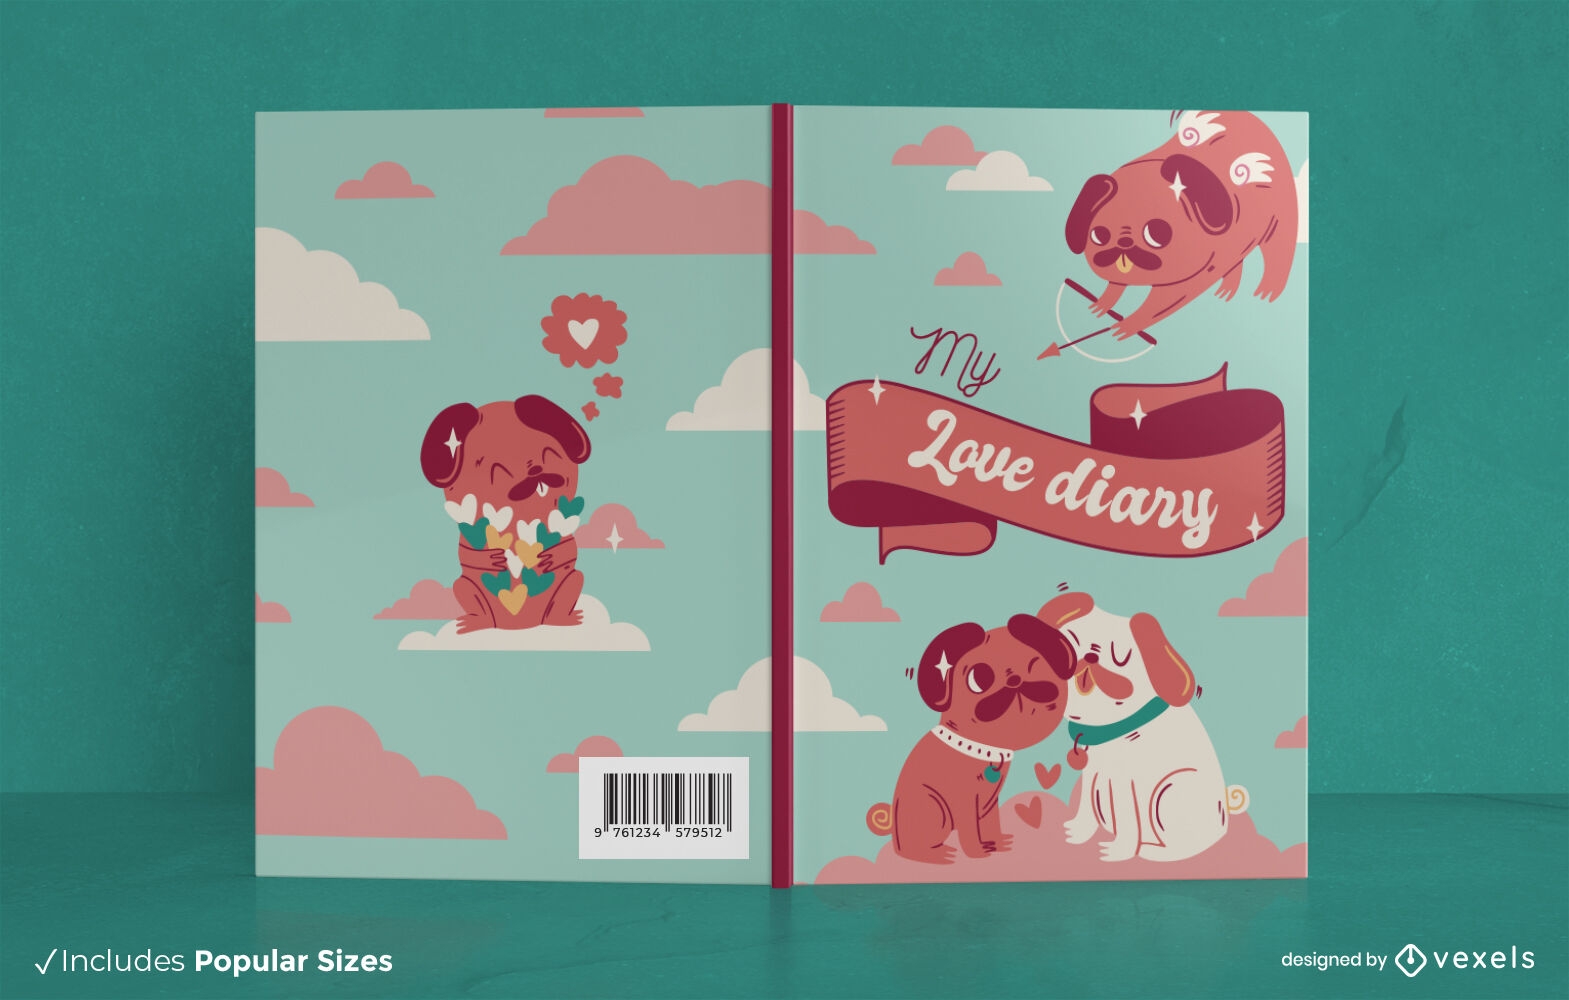 Lovely dogs diary book cover design